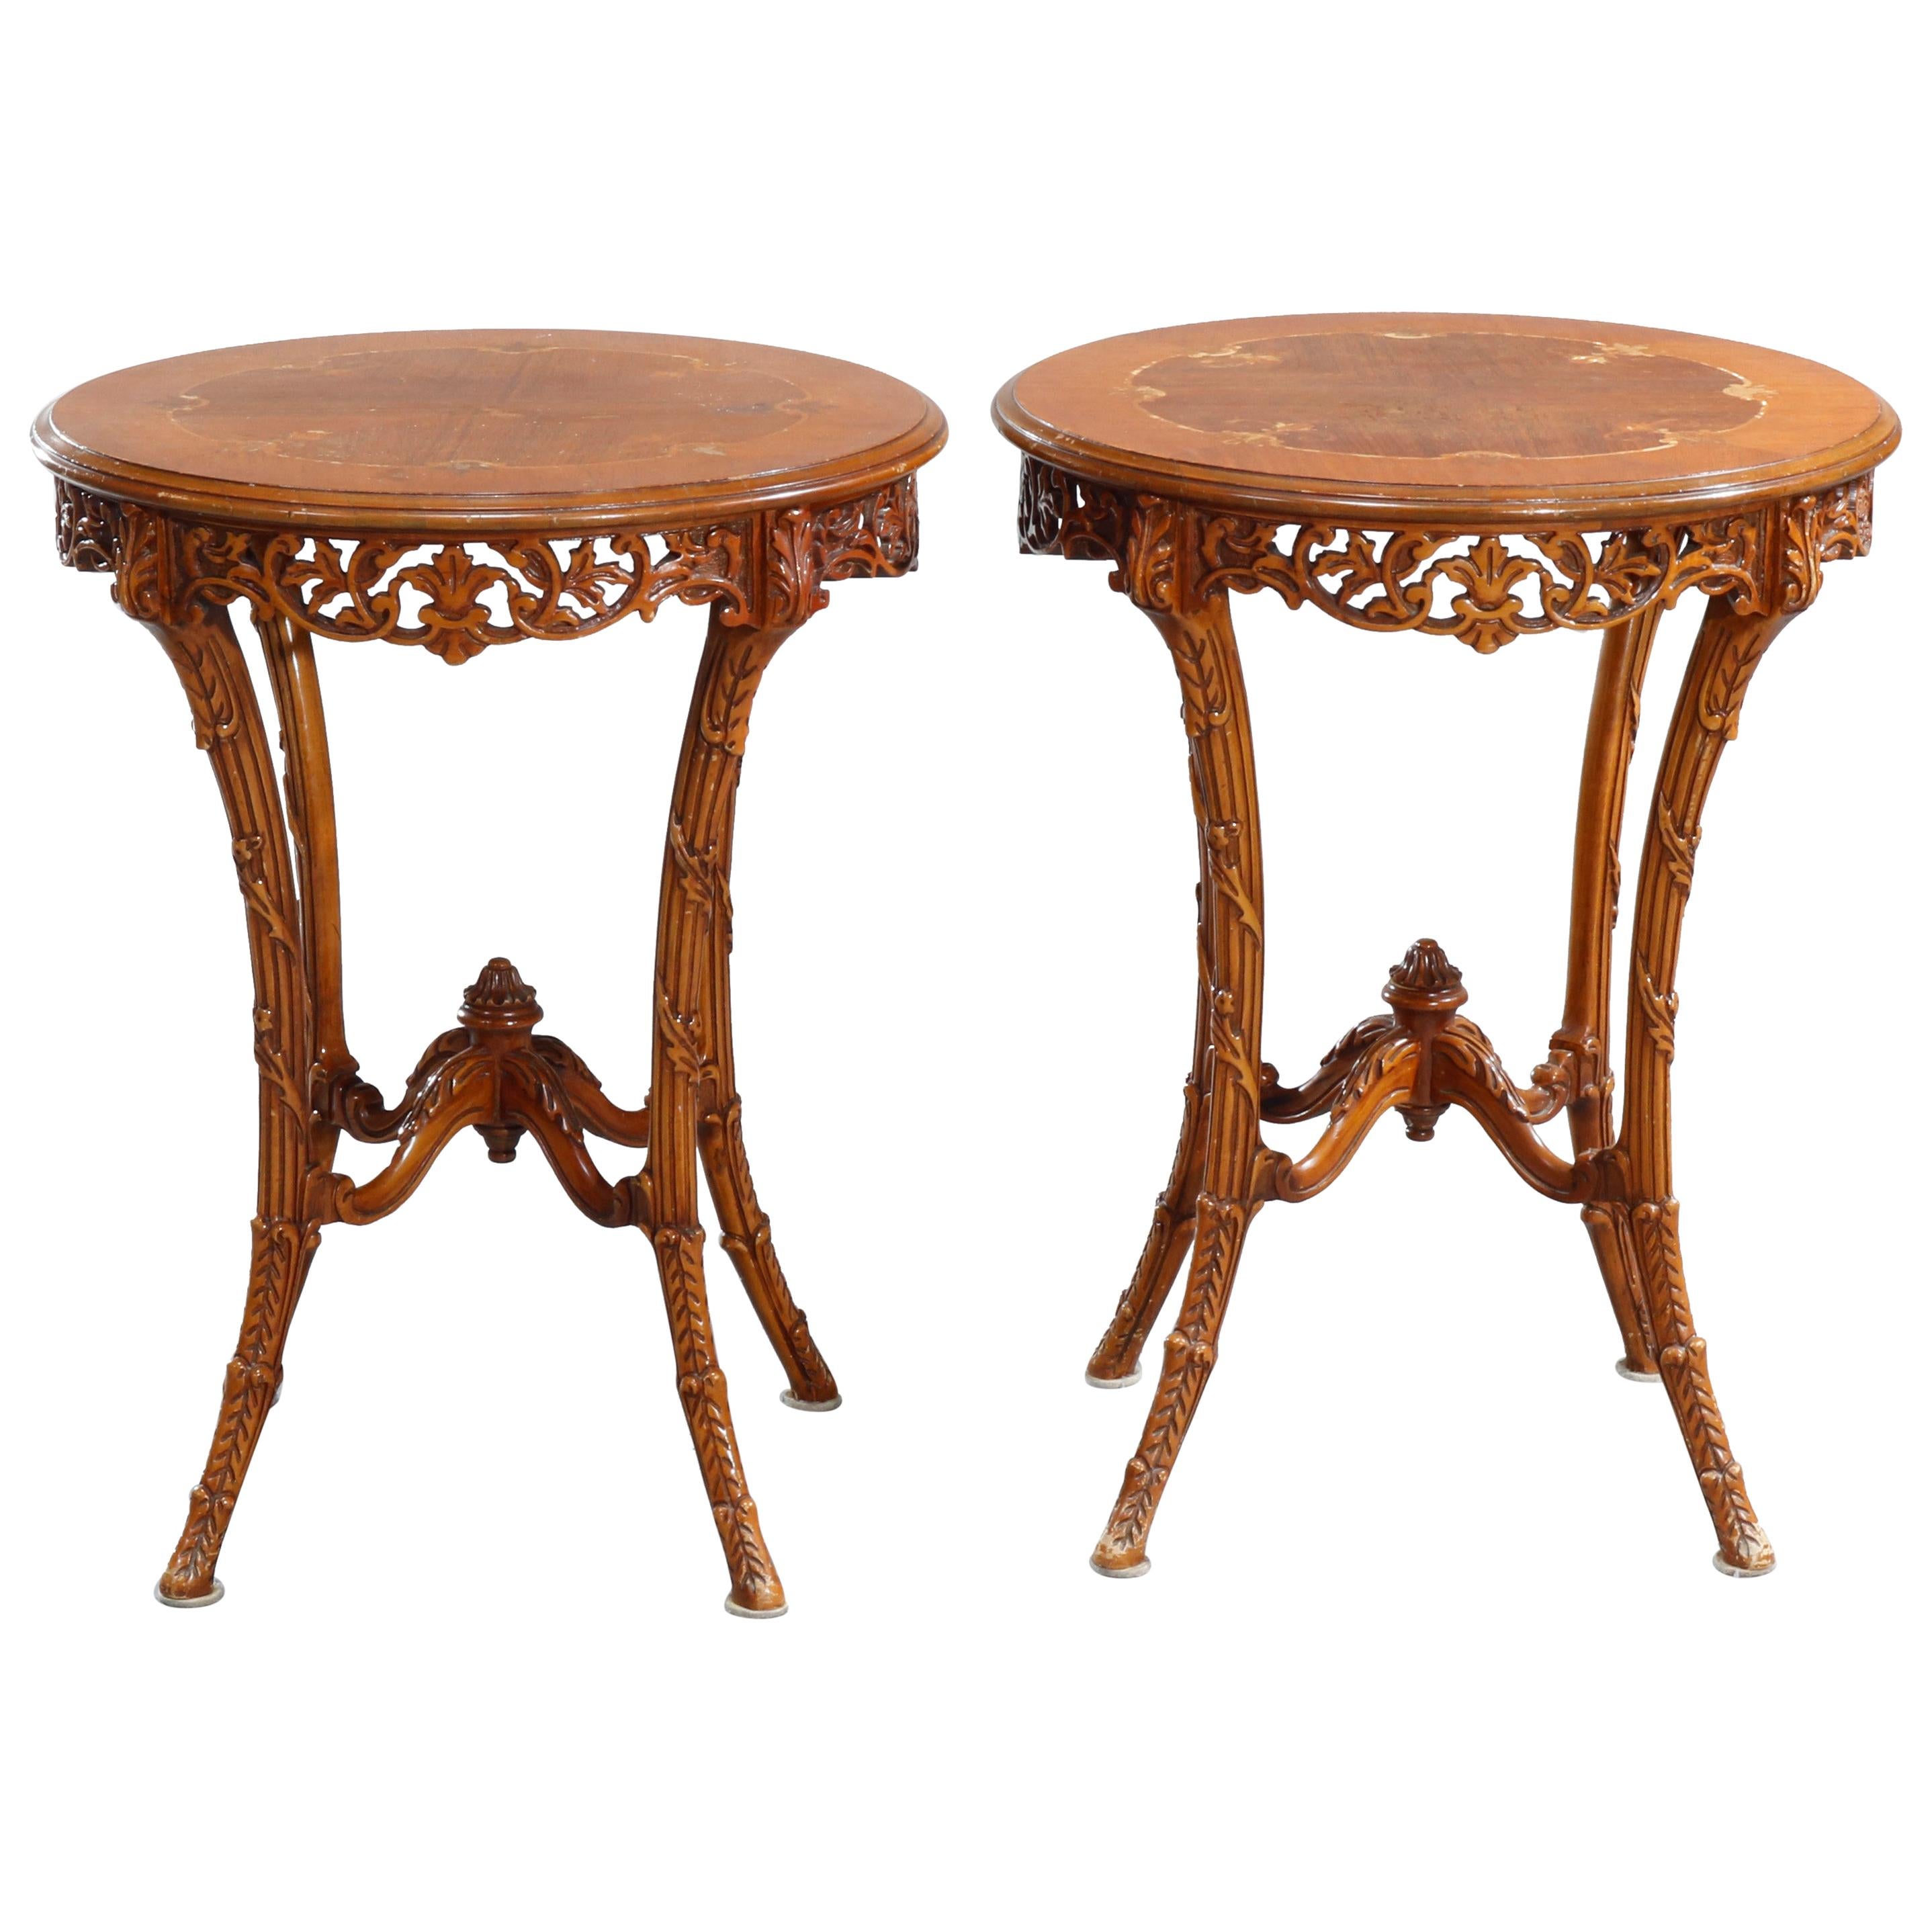 Antique French Louis XVI Satinwood & Rosewood Marquetry Side Tables, c 1930